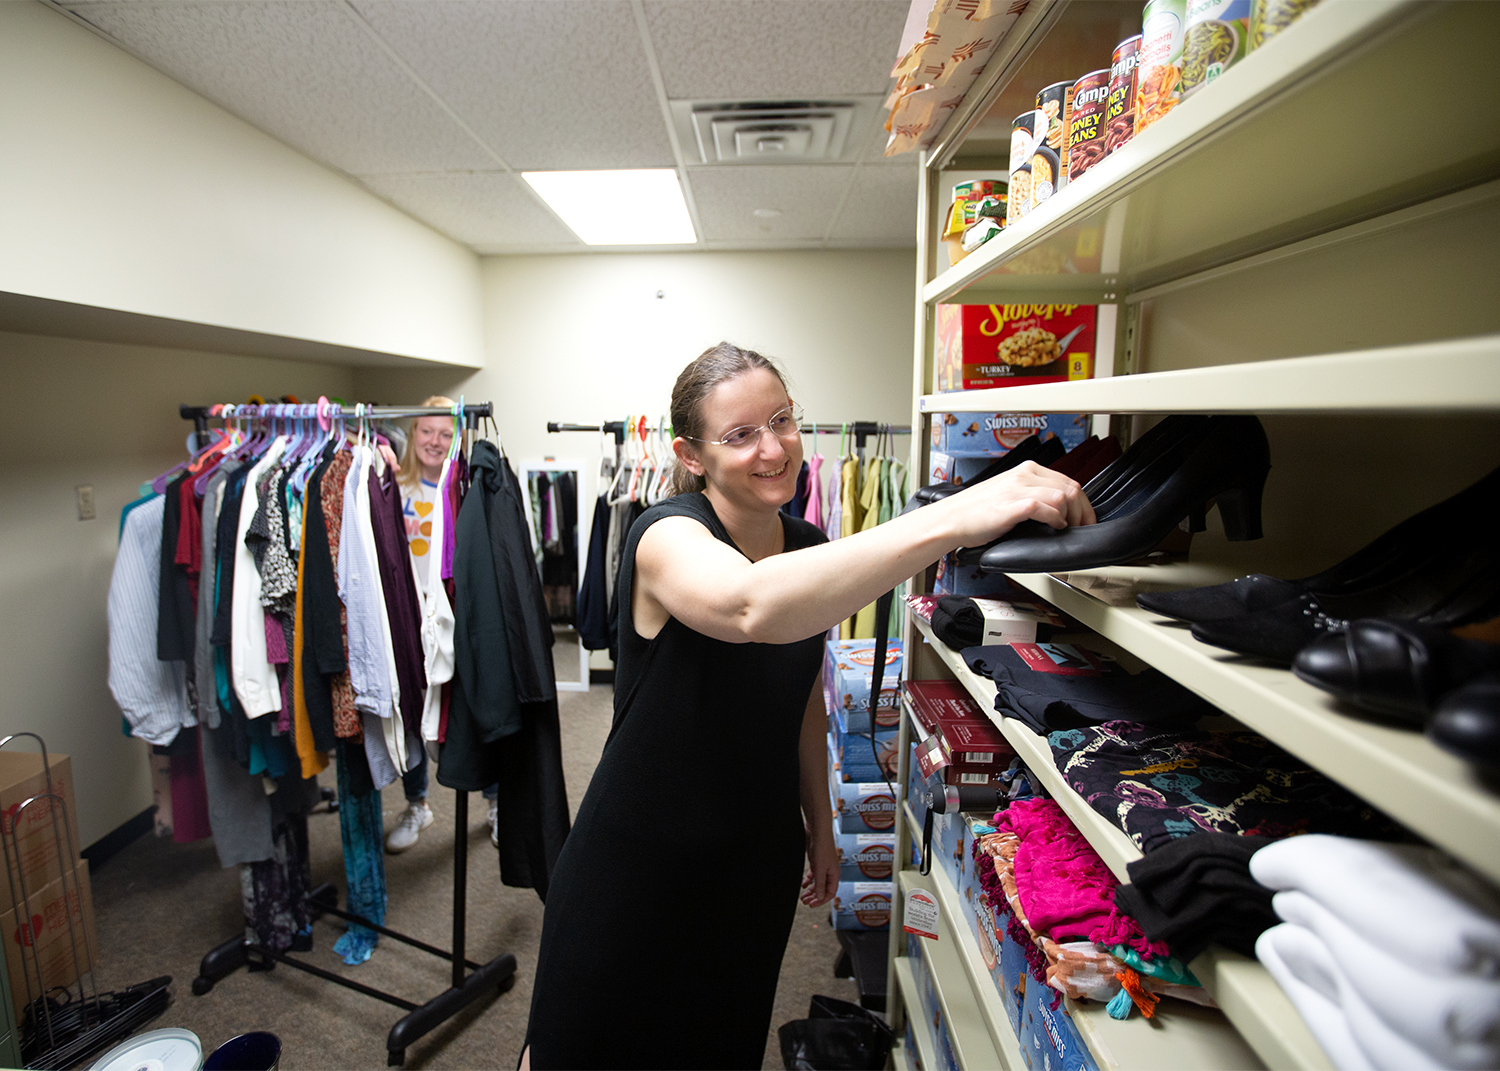 Sara Snyder places a pair of shoes in the career closet.